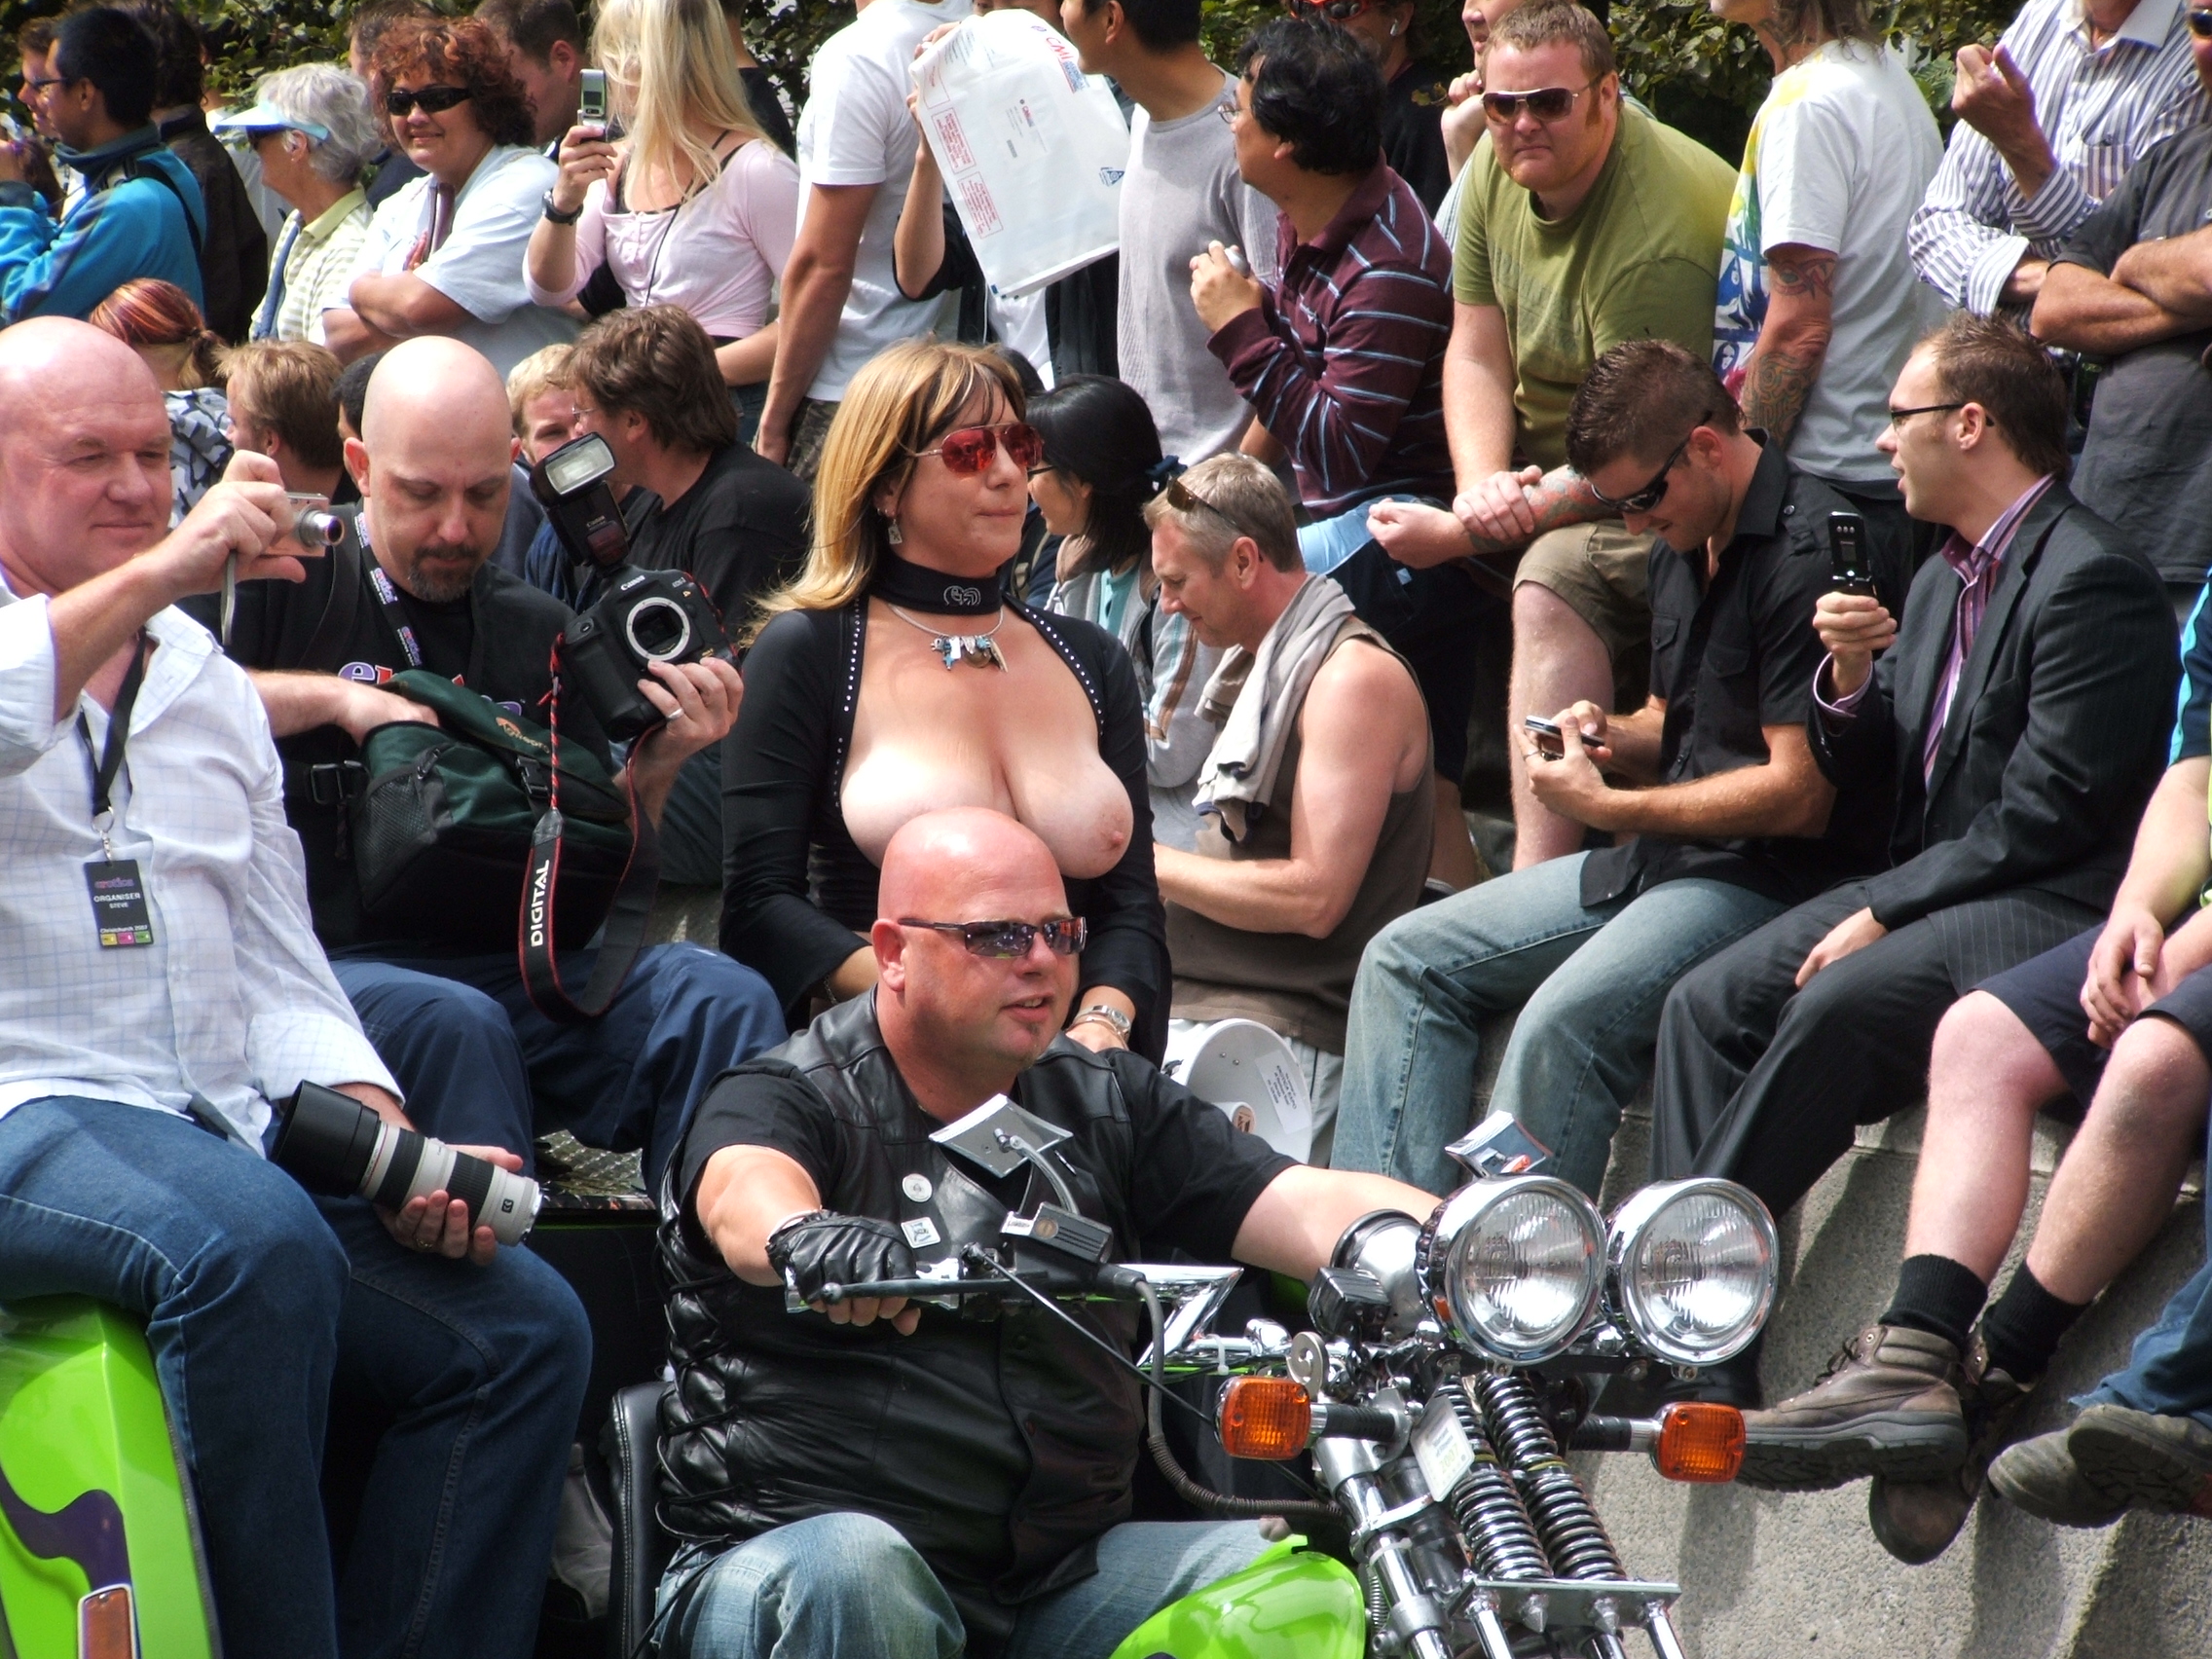 Boobs on Bikes is a mostly annual parade of topless men and women riding on...